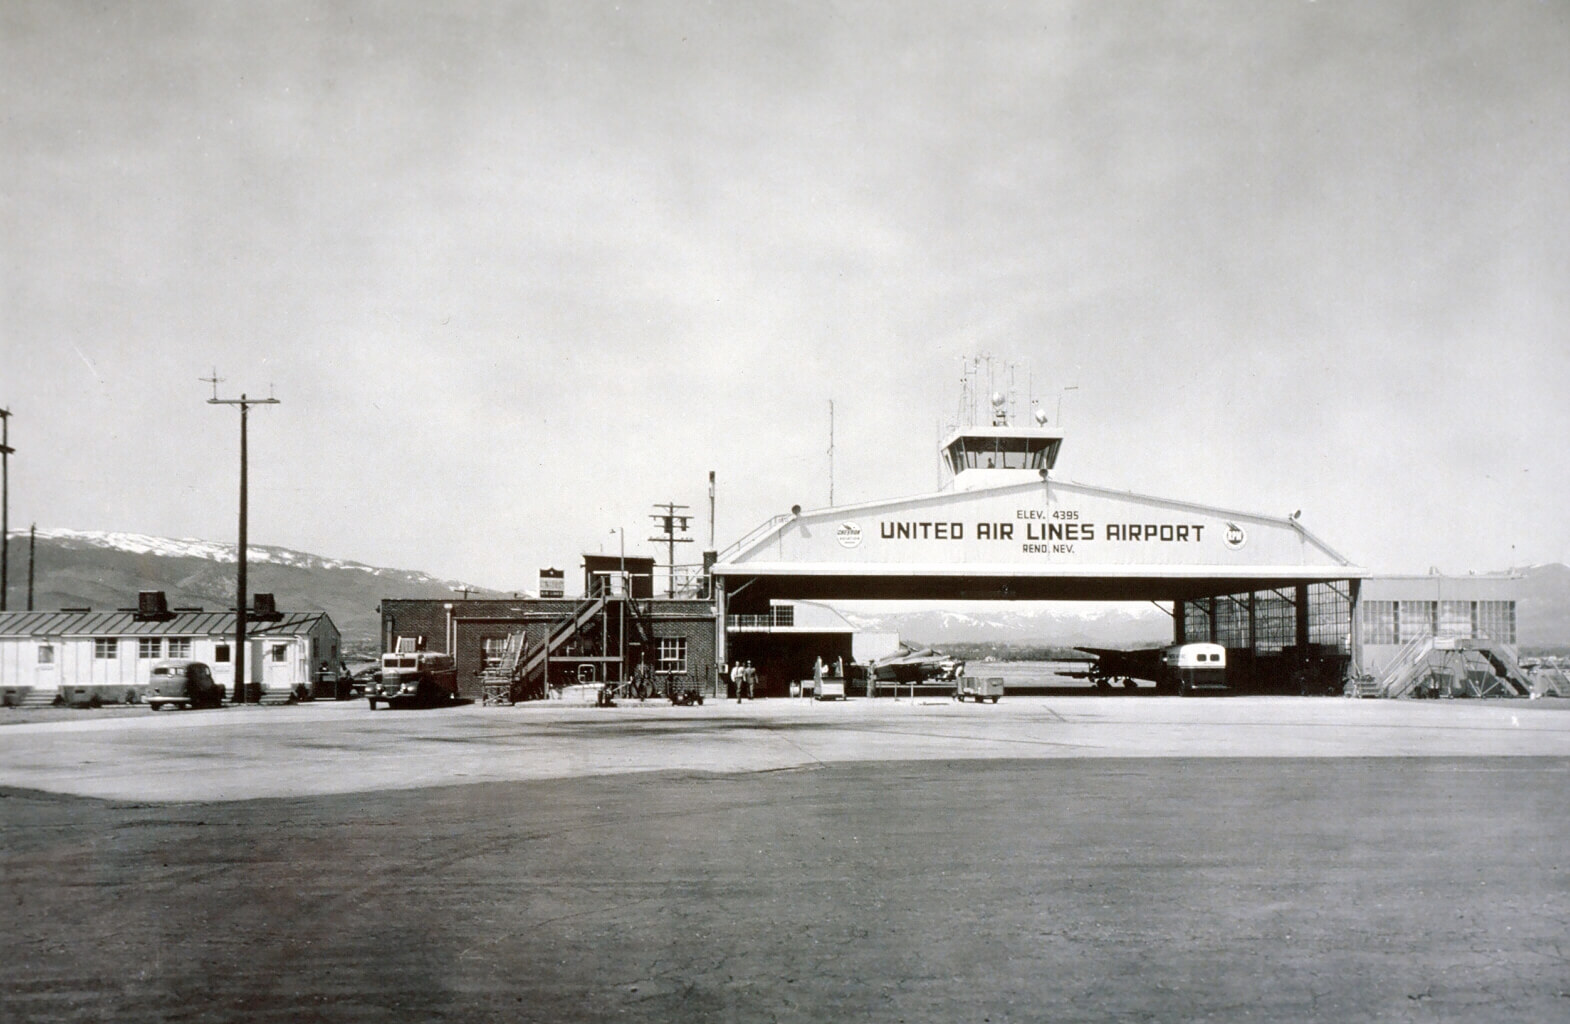 Historic photo of United Air Lines Airport in Reno, NV.